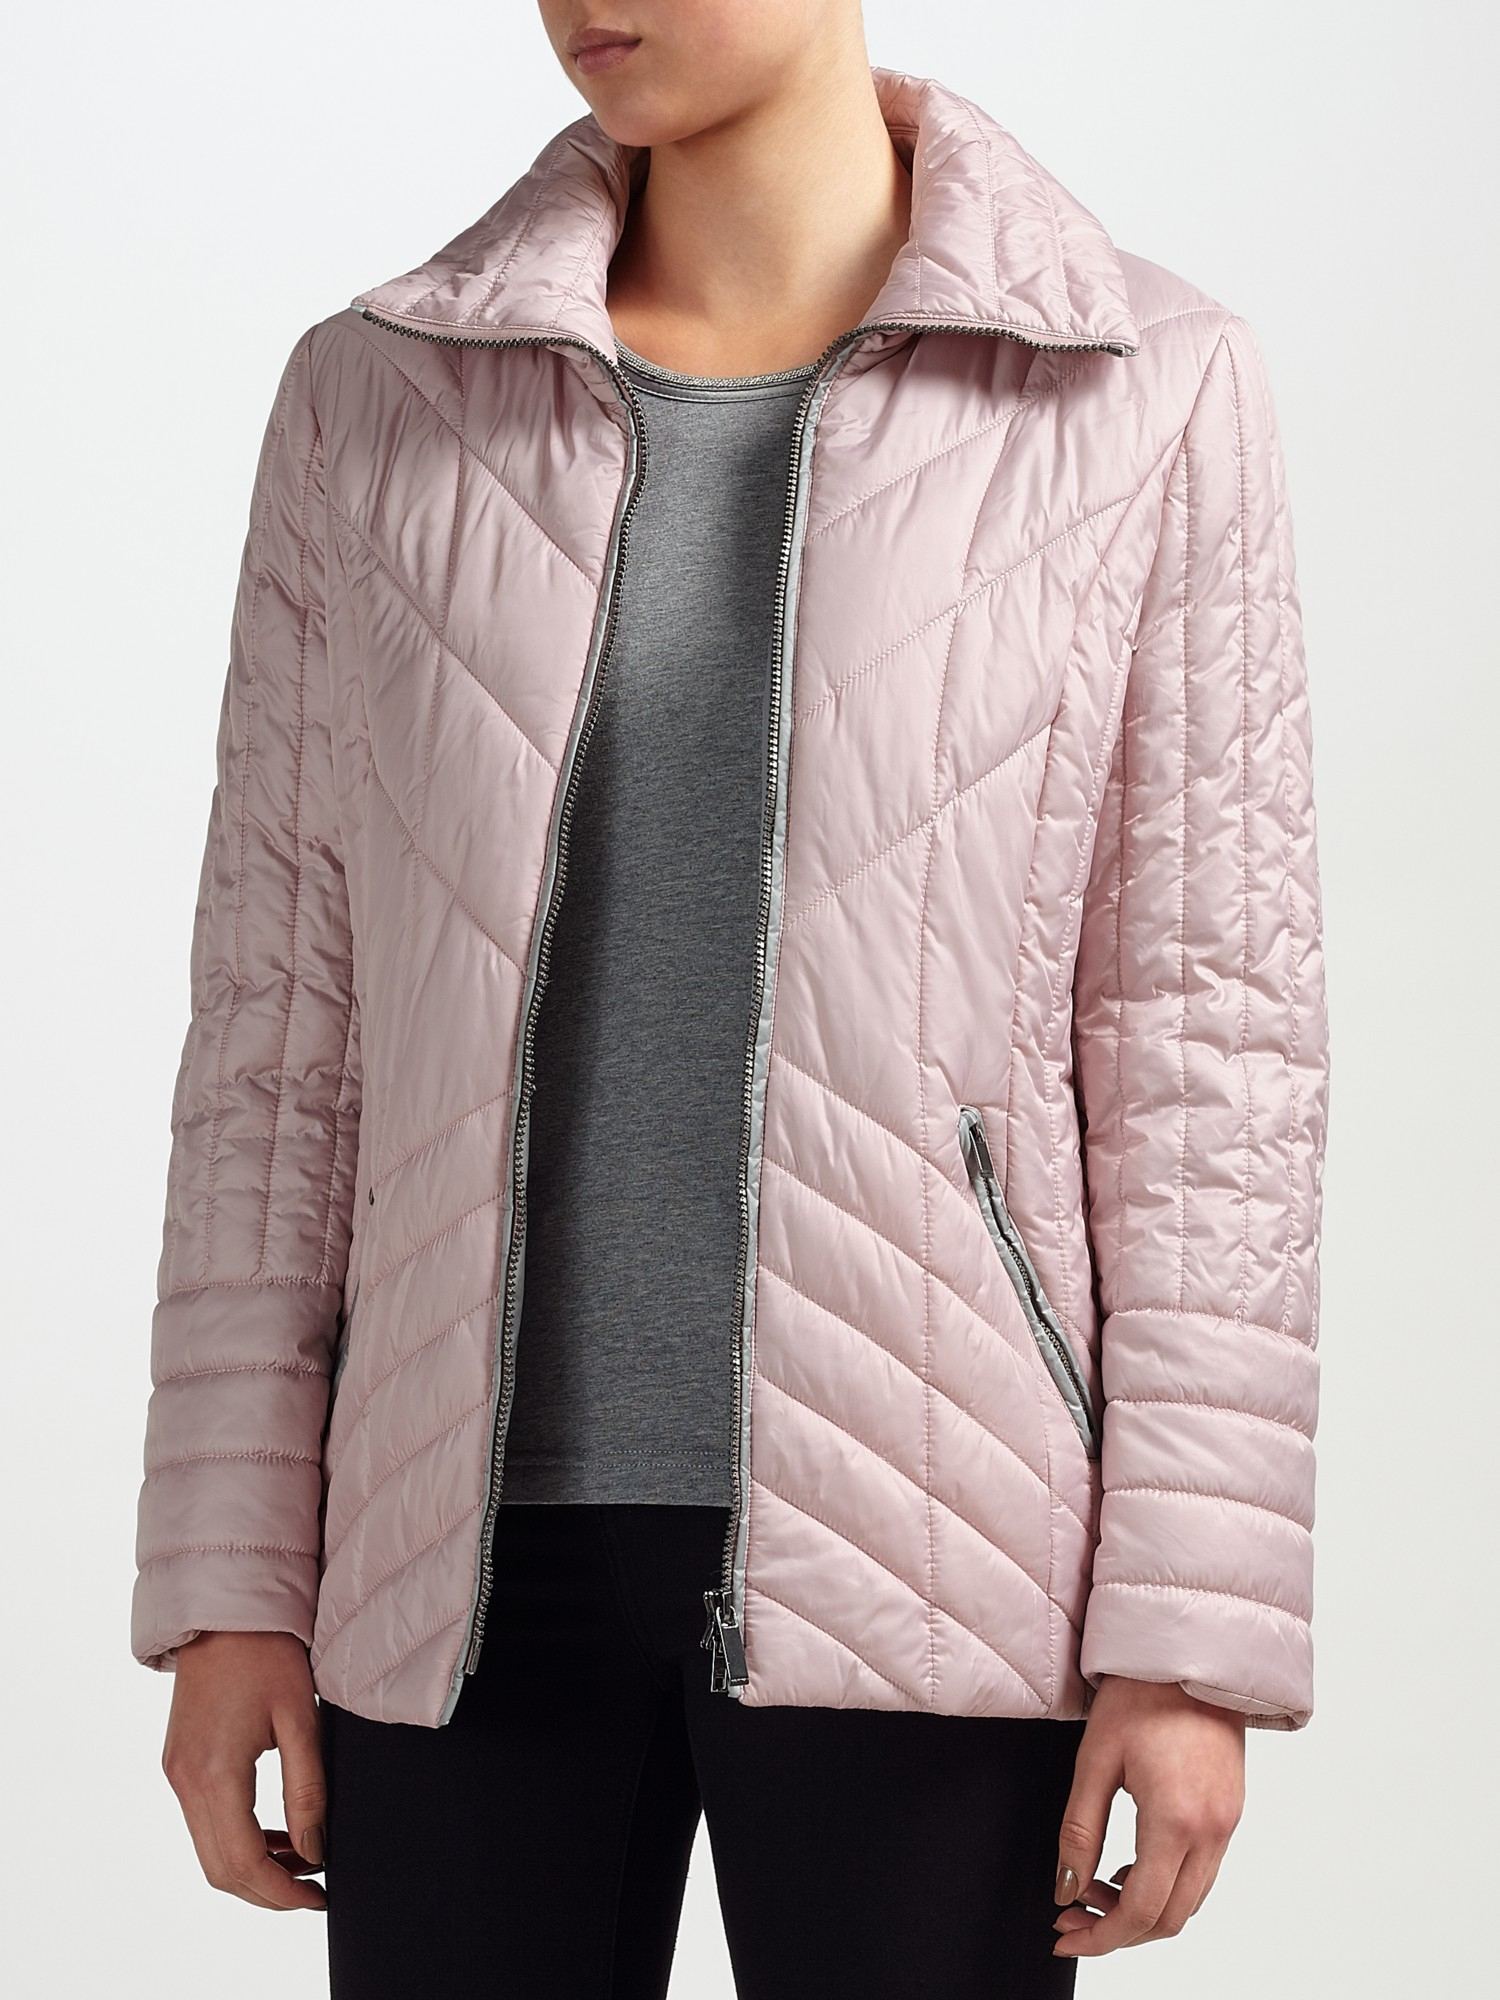 Gerry Weber Quilted Jacket in Pink - Lyst